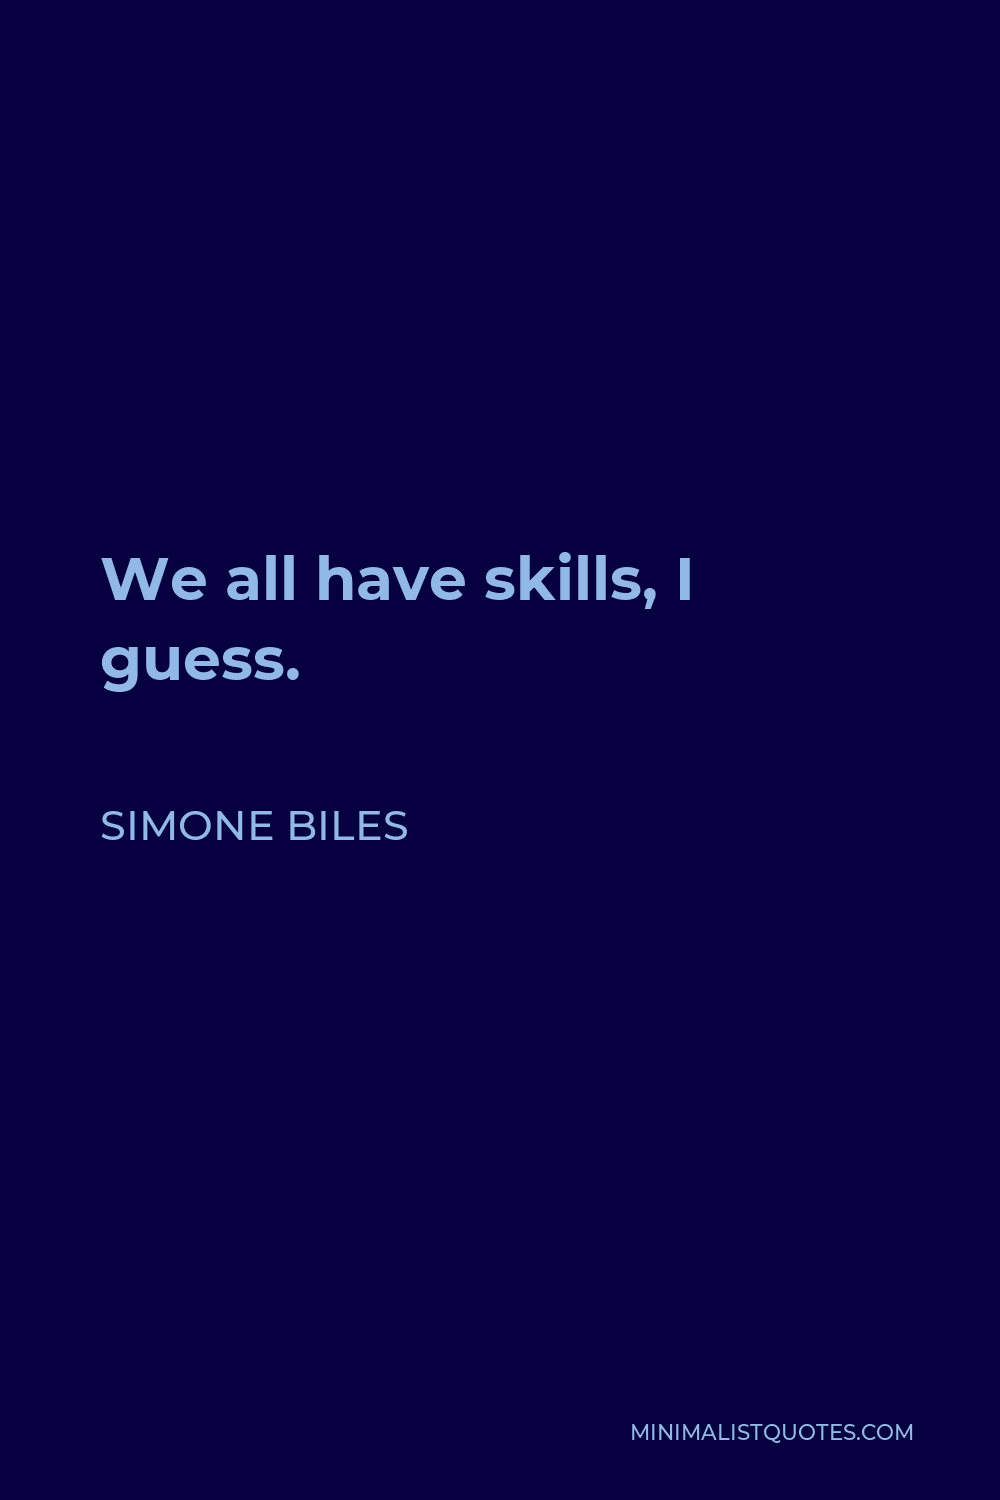 Simone Biles Quote - We all have skills, I guess.